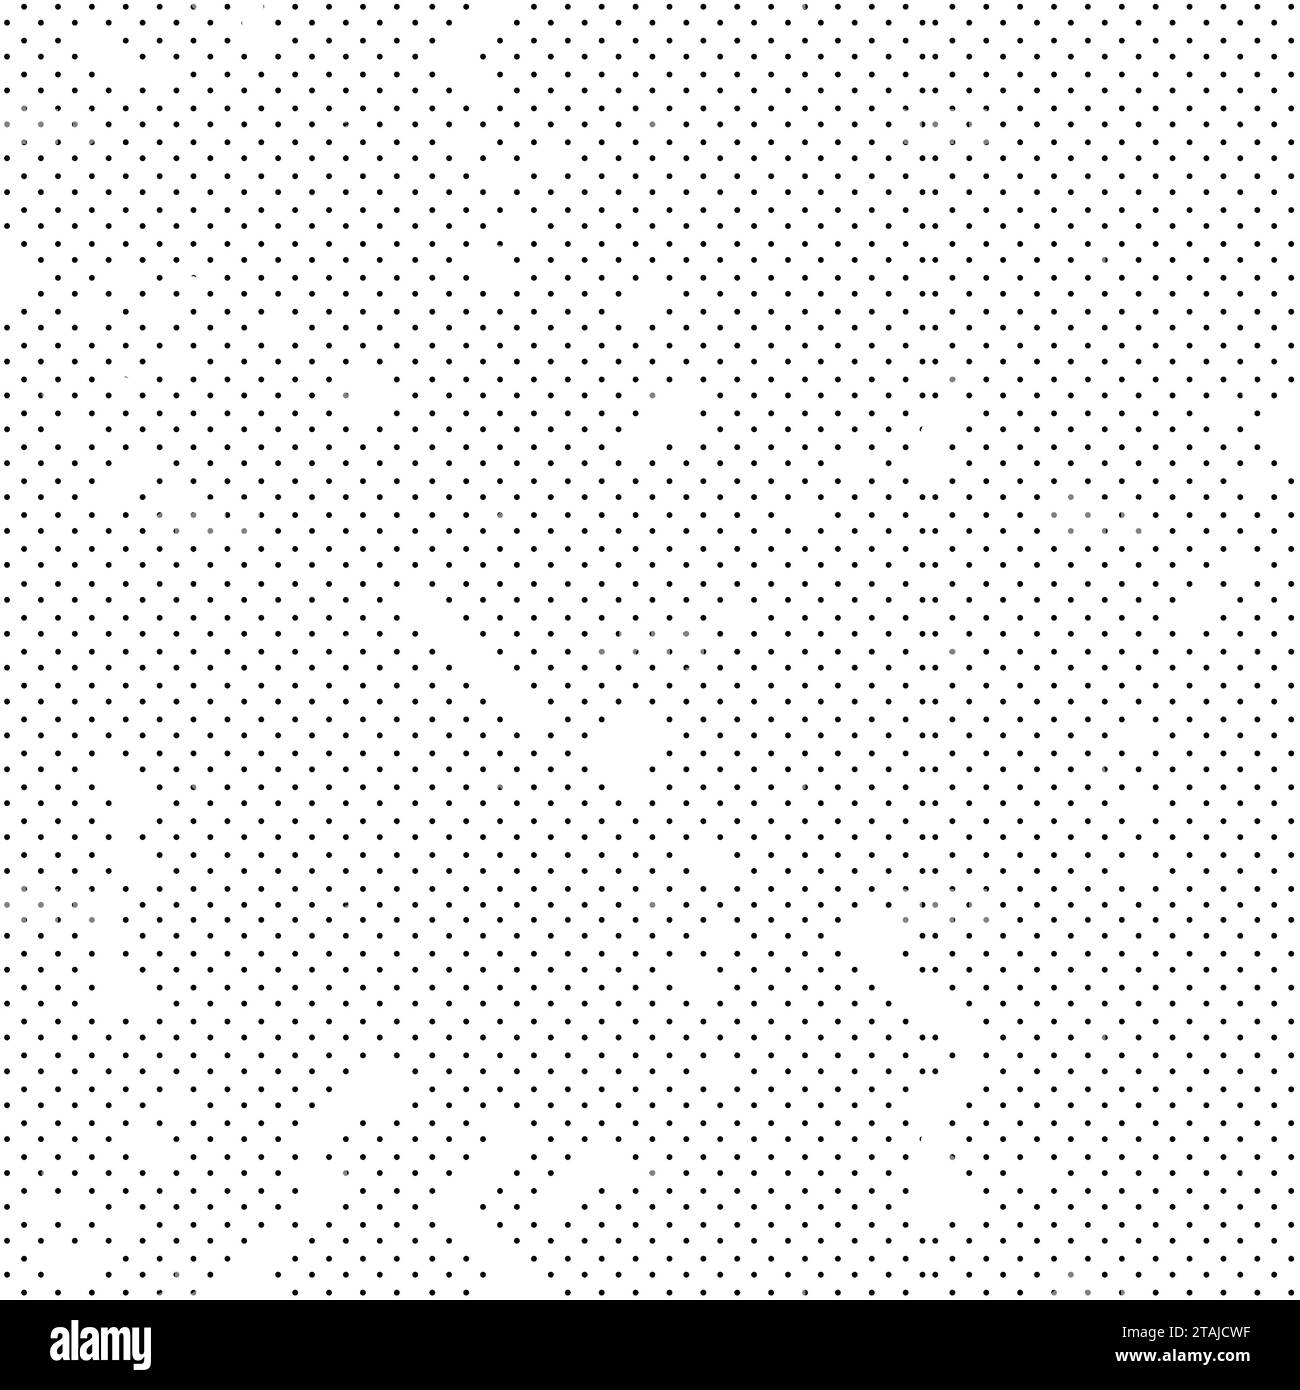 Vector panorama drafting paper. Graphic regular dots grid background. Panorama paper sheet for web design. Stock Photo